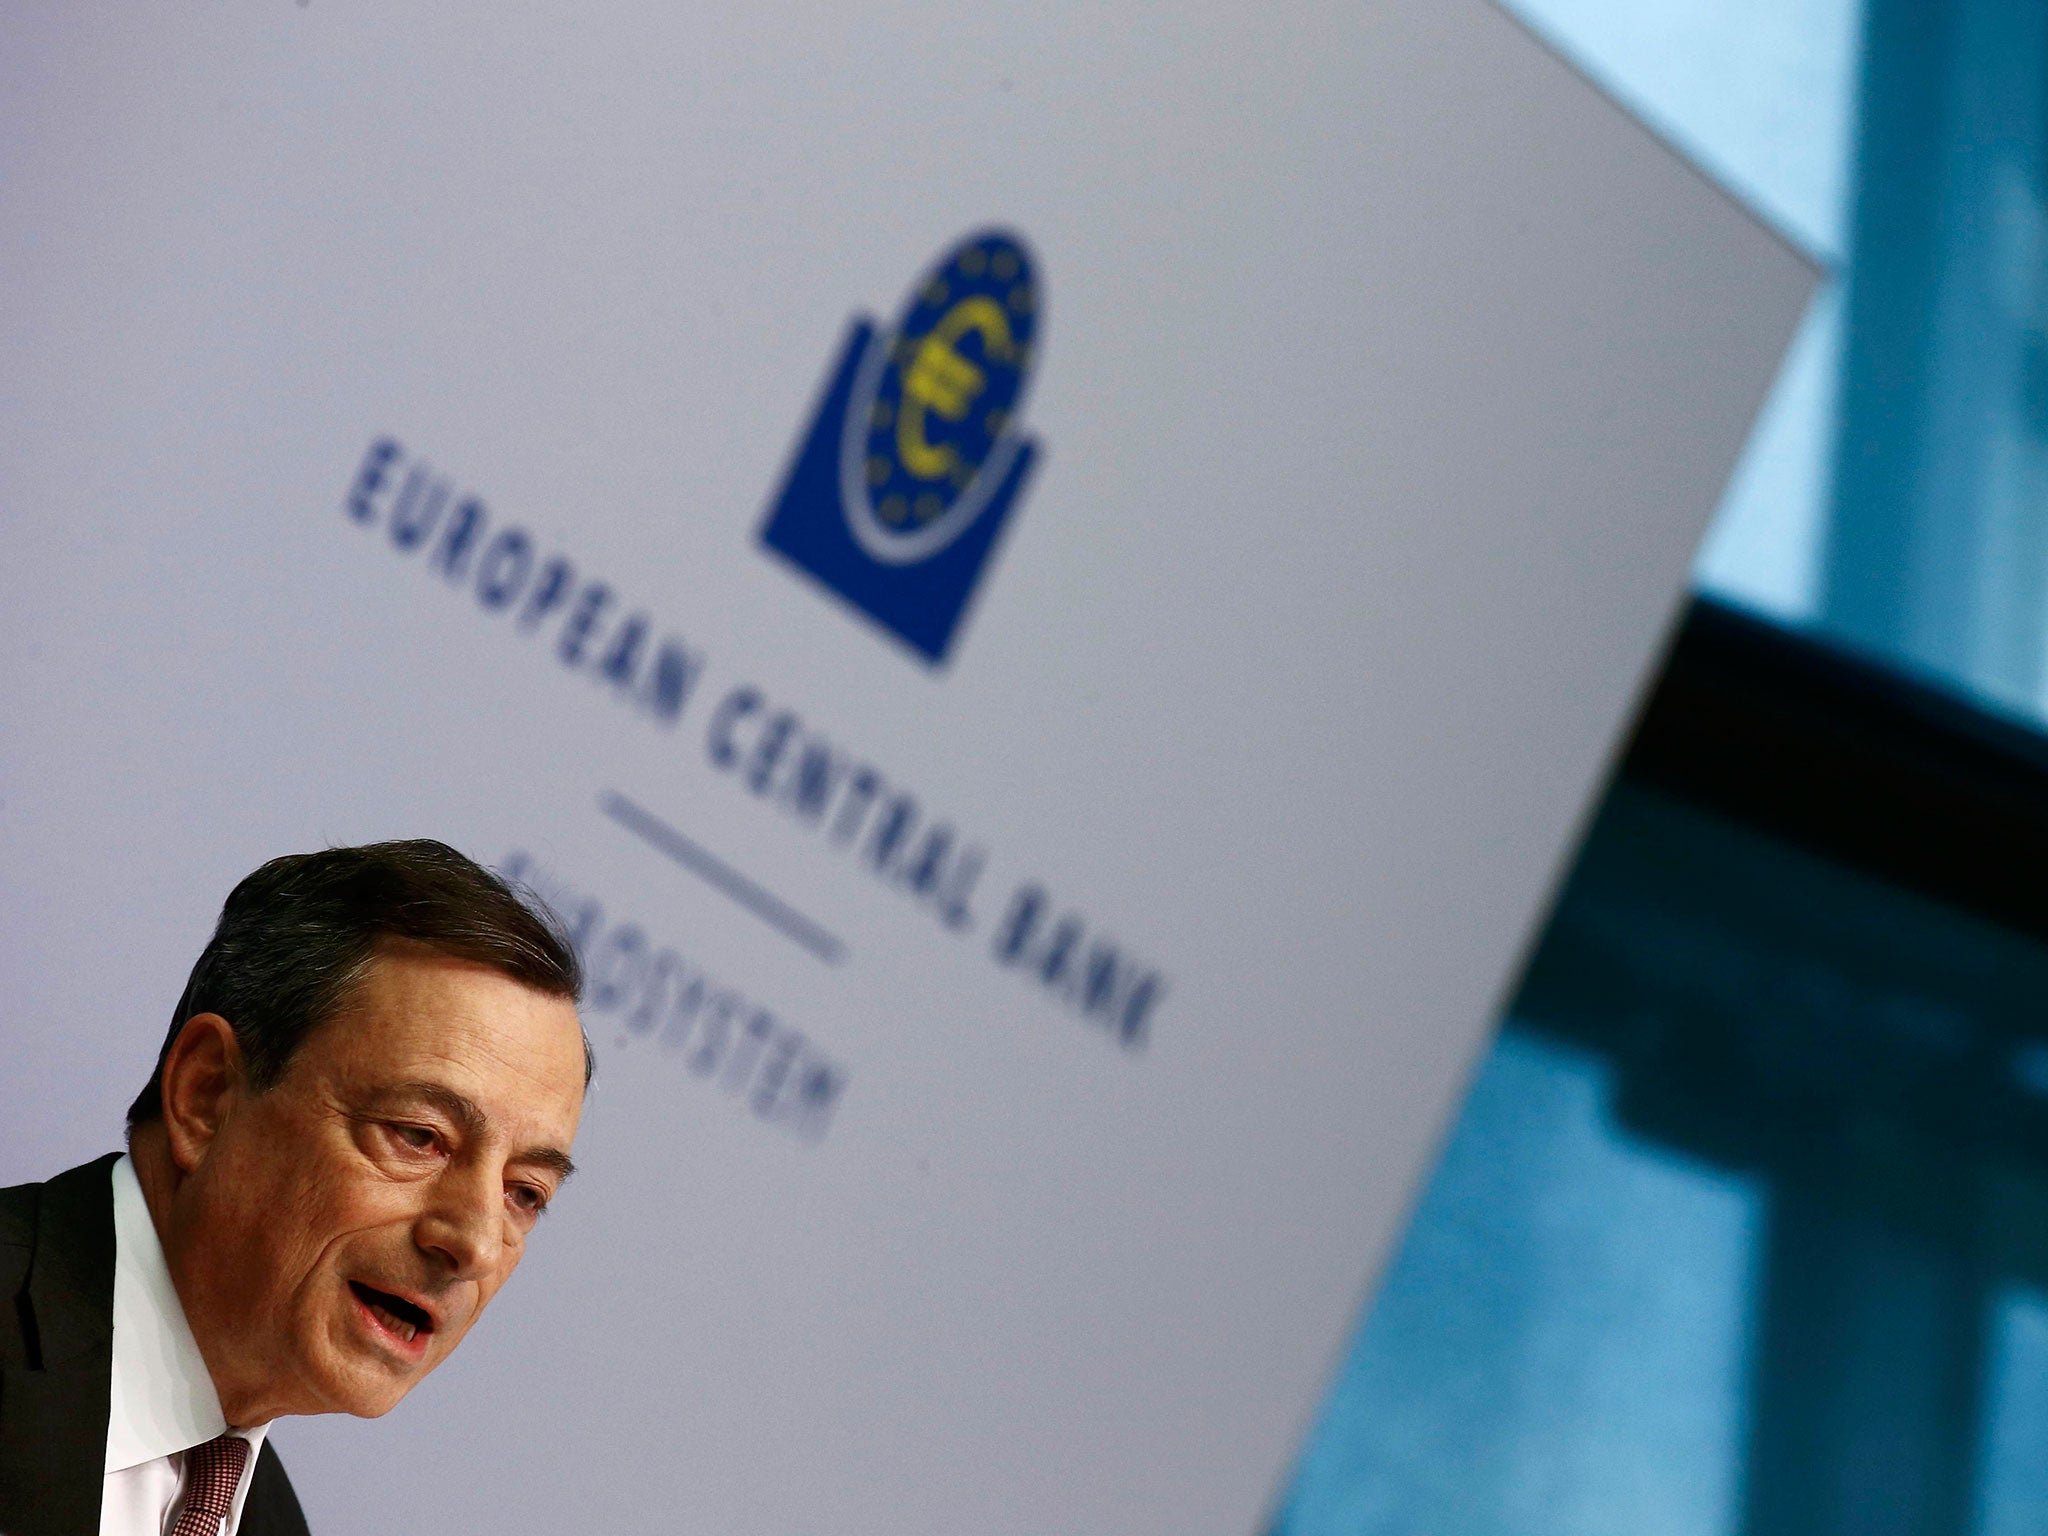 Mario Draghi inisted the recovery was 'on track' at the ECB press conference in Frankfurt